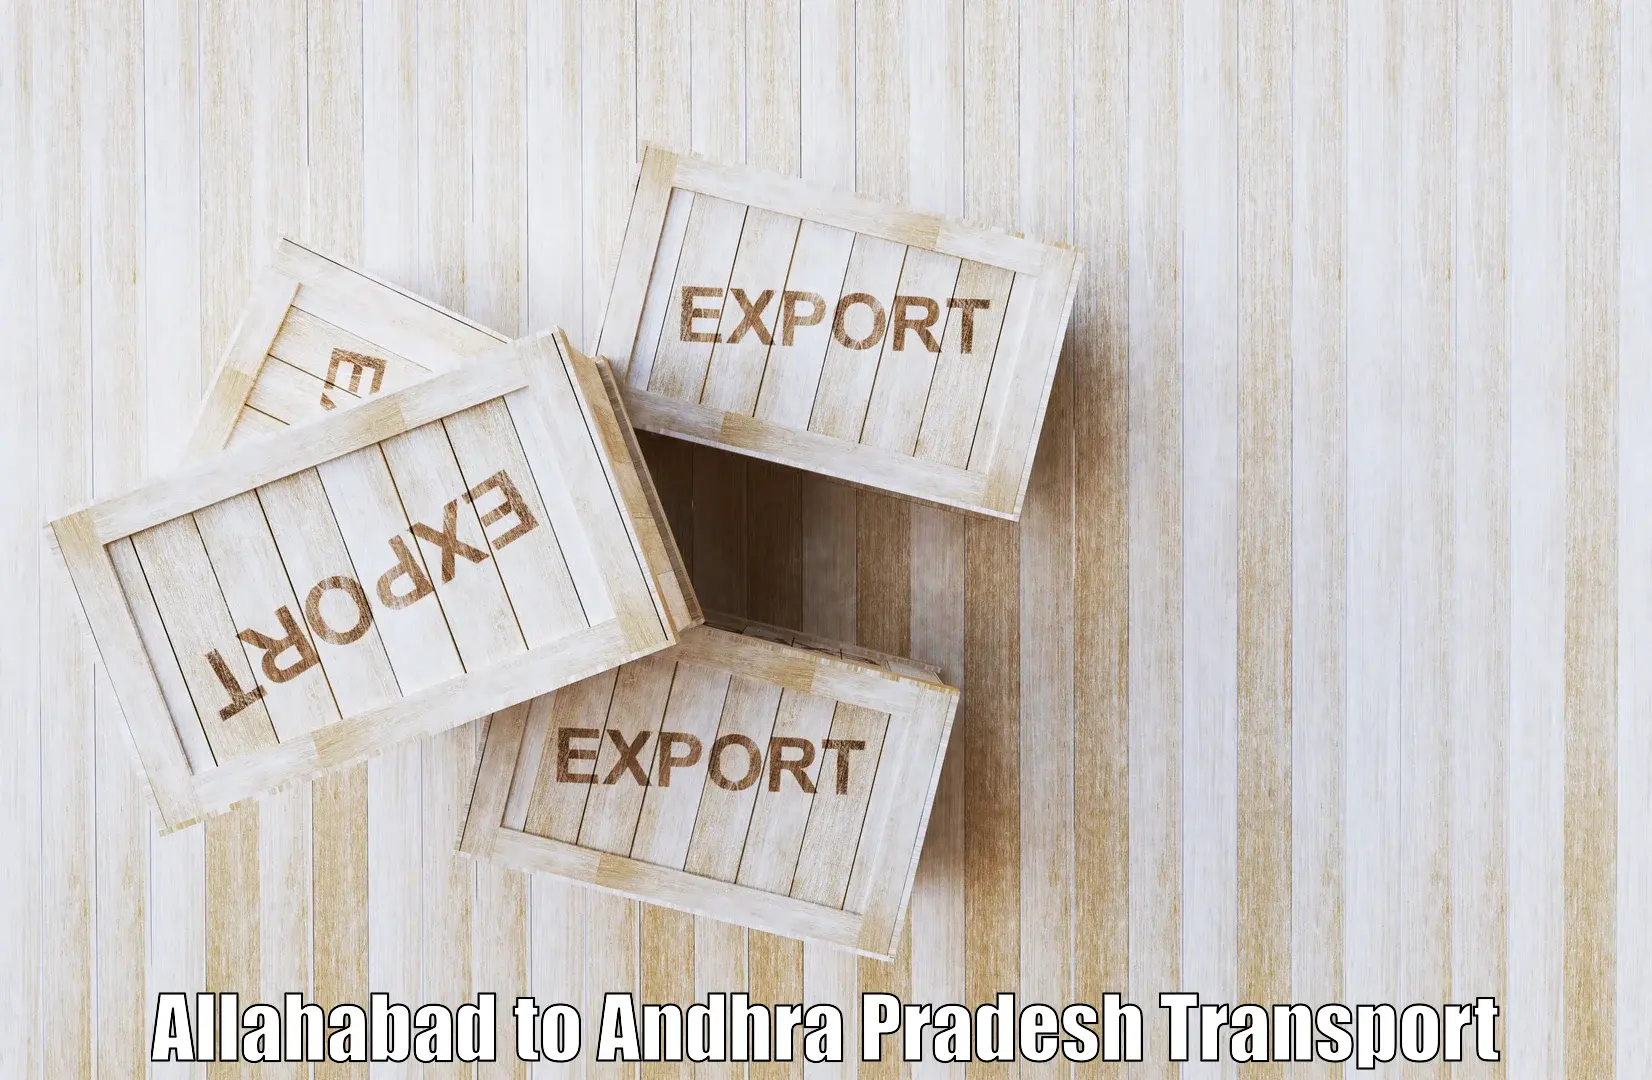 Parcel transport services Allahabad to IIIT Chittoor